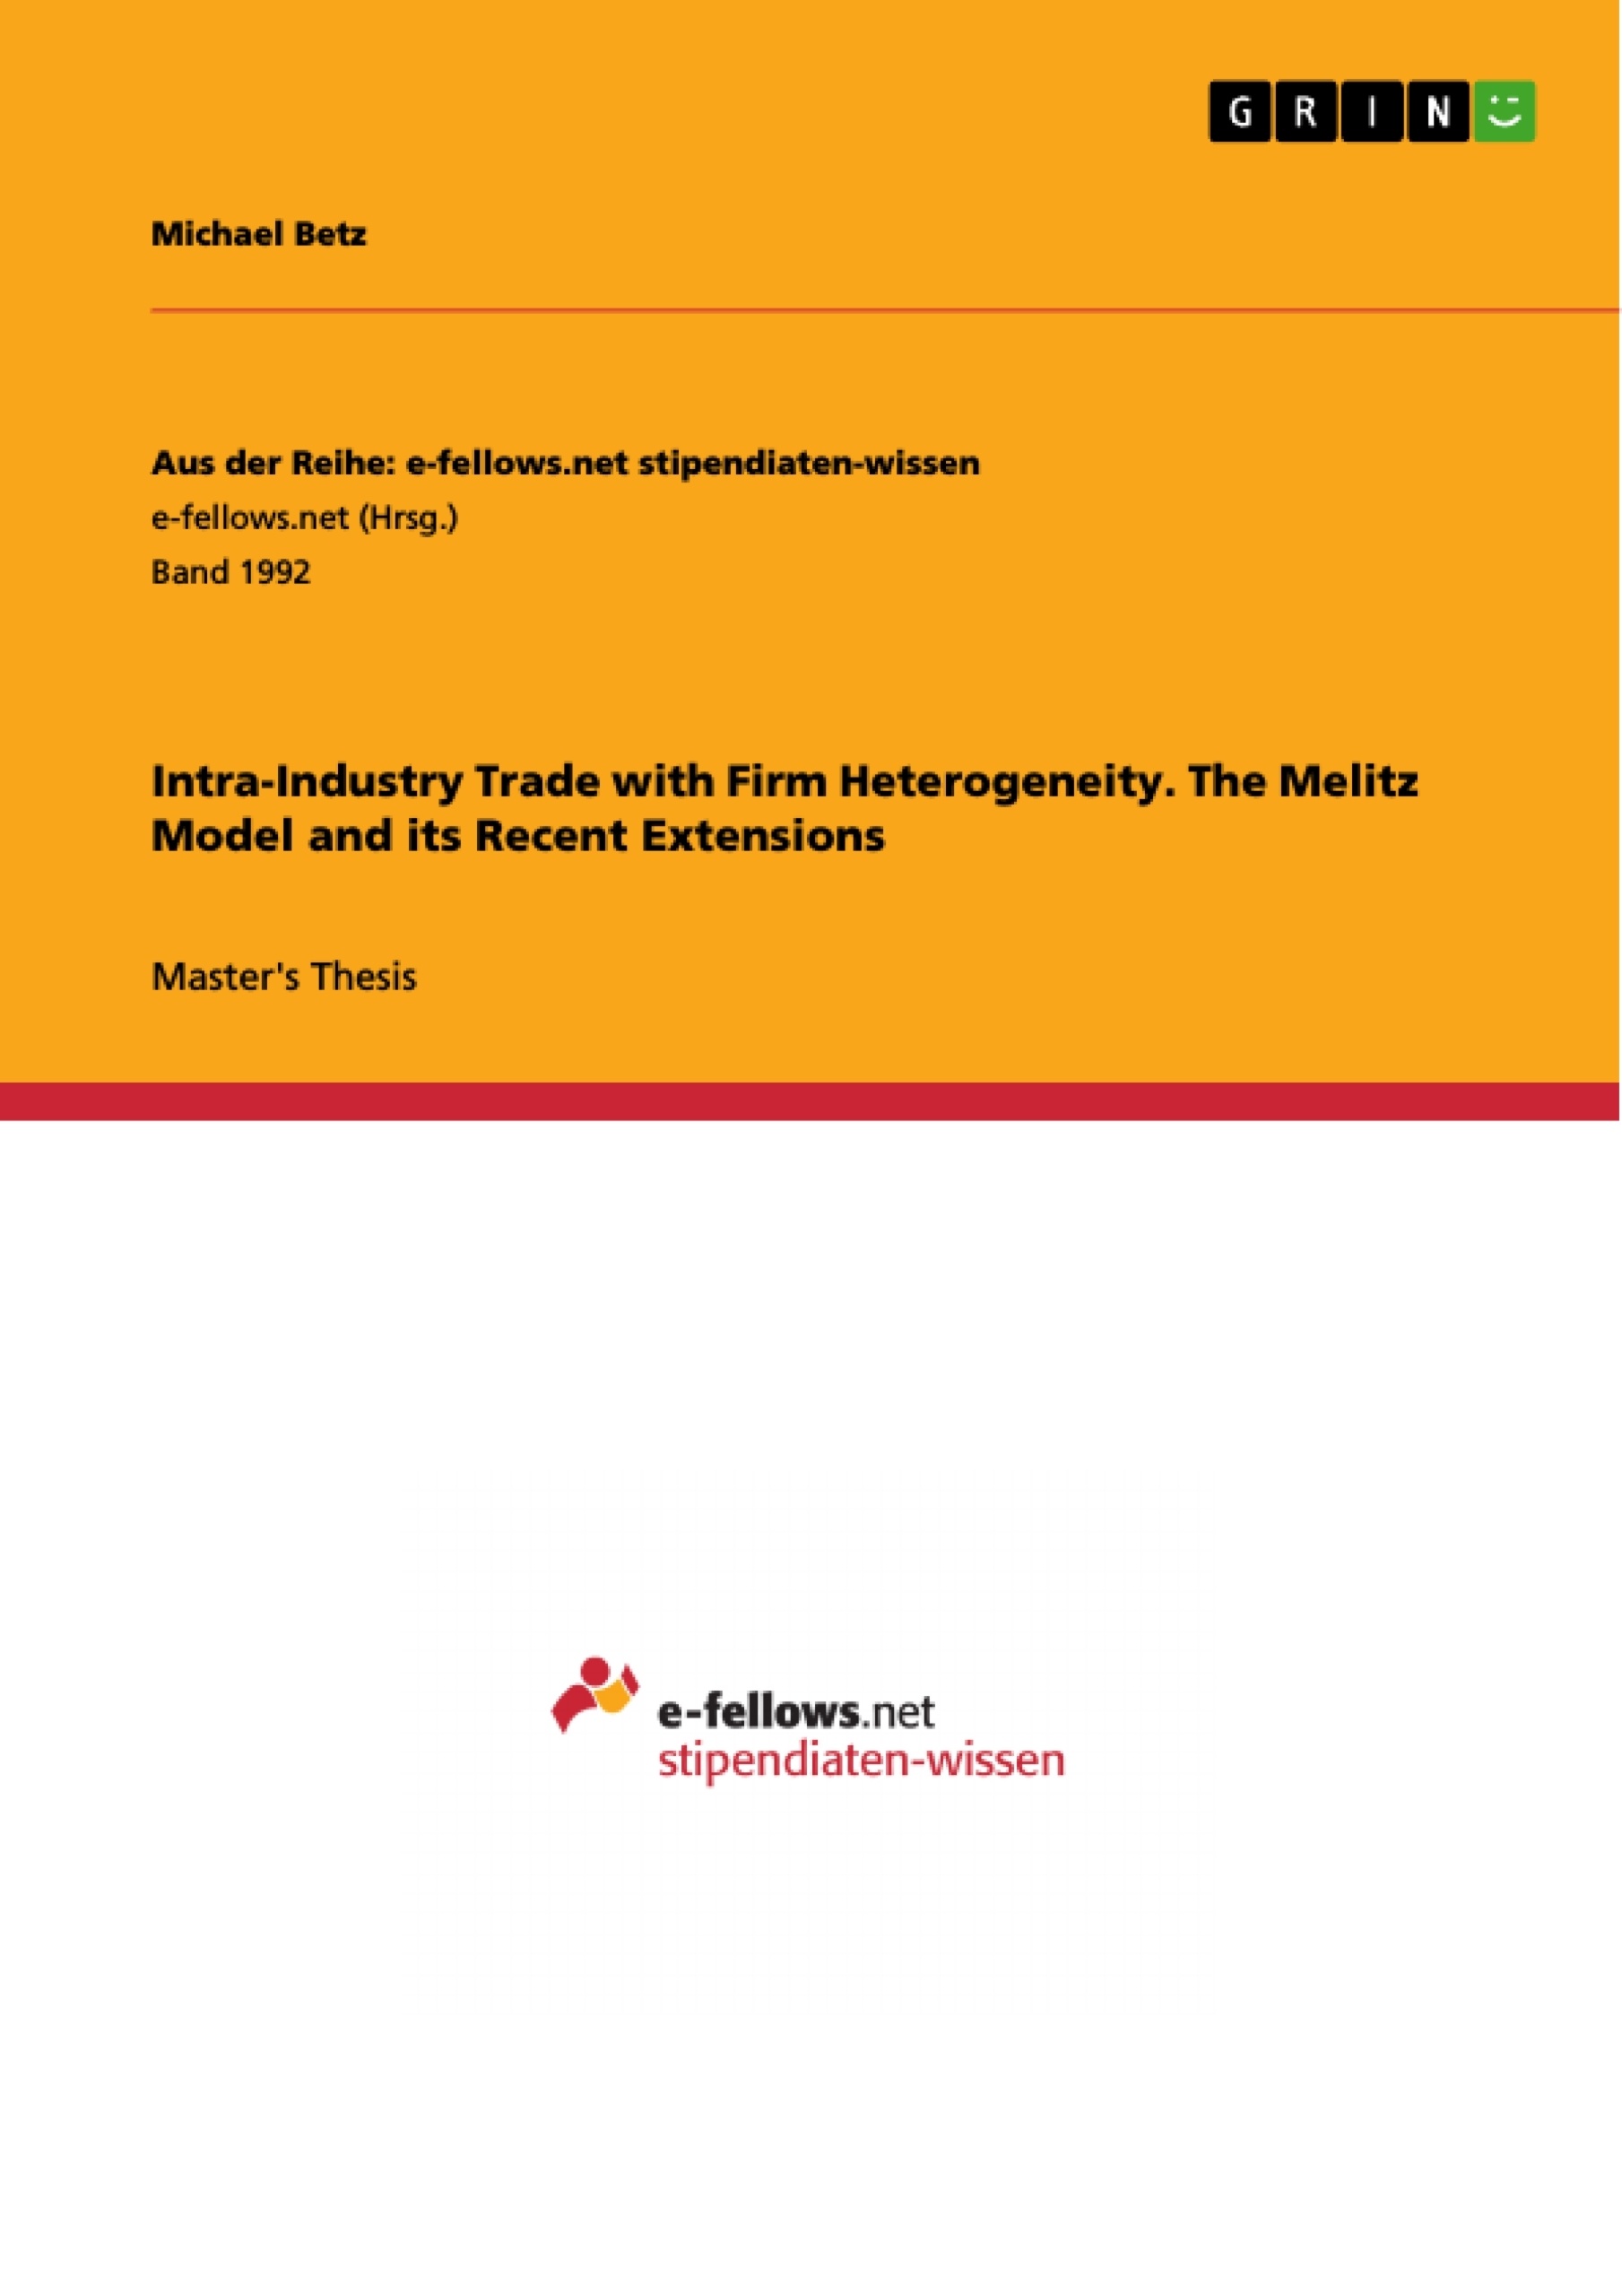 Title: Intra-Industry Trade with Firm Heterogeneity. The Melitz Model and its Recent Extensions